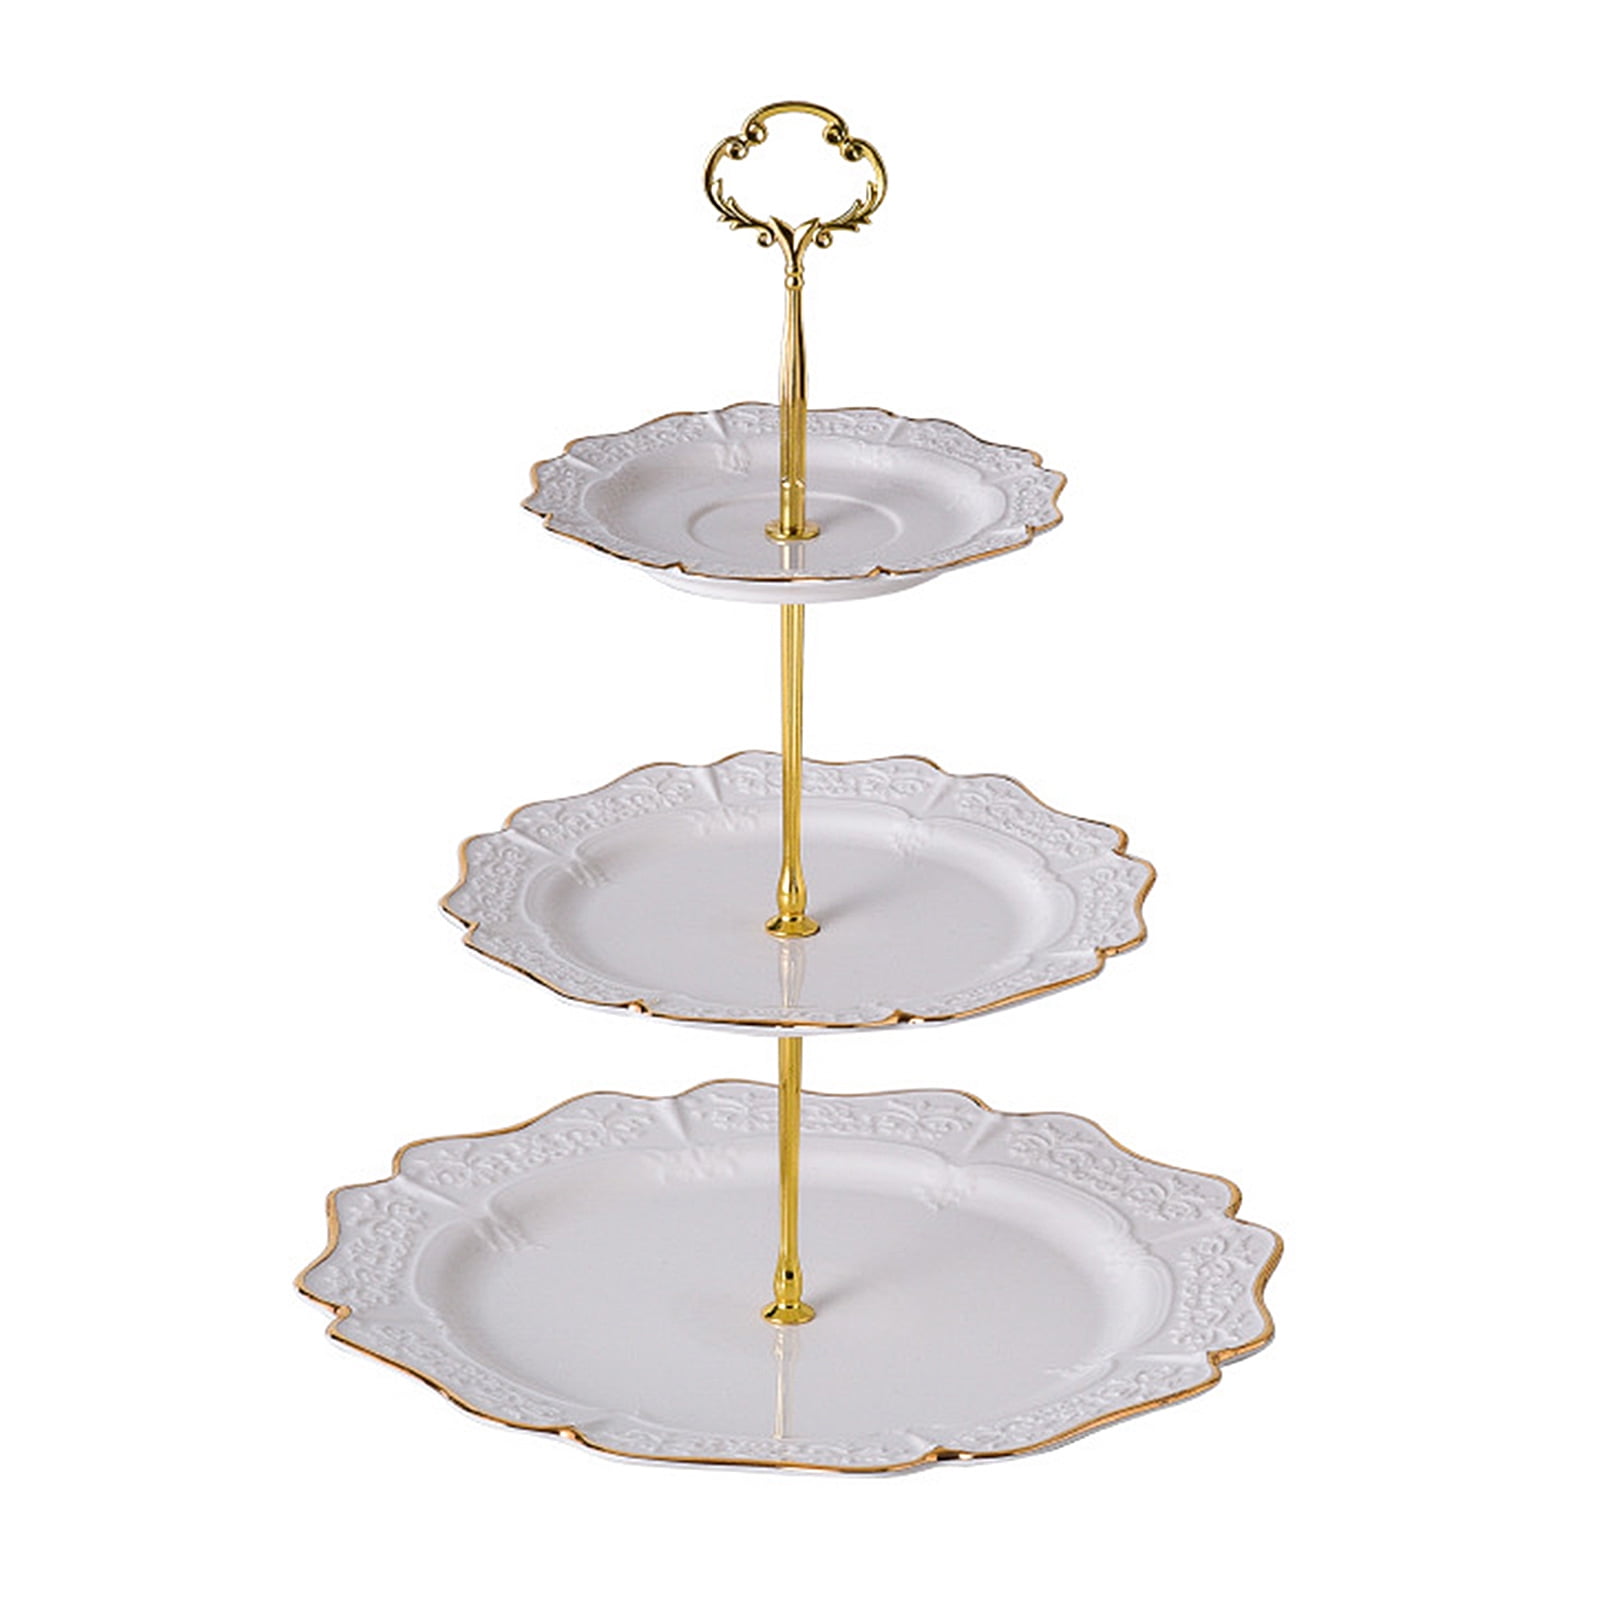 18 23 30 cm ANZOME Golden Tray Ornaments Plate for Serving Cake Biscuits Drinks Towel Decorative Desk Supplies Organisers Steel Gold, 3-Pack 